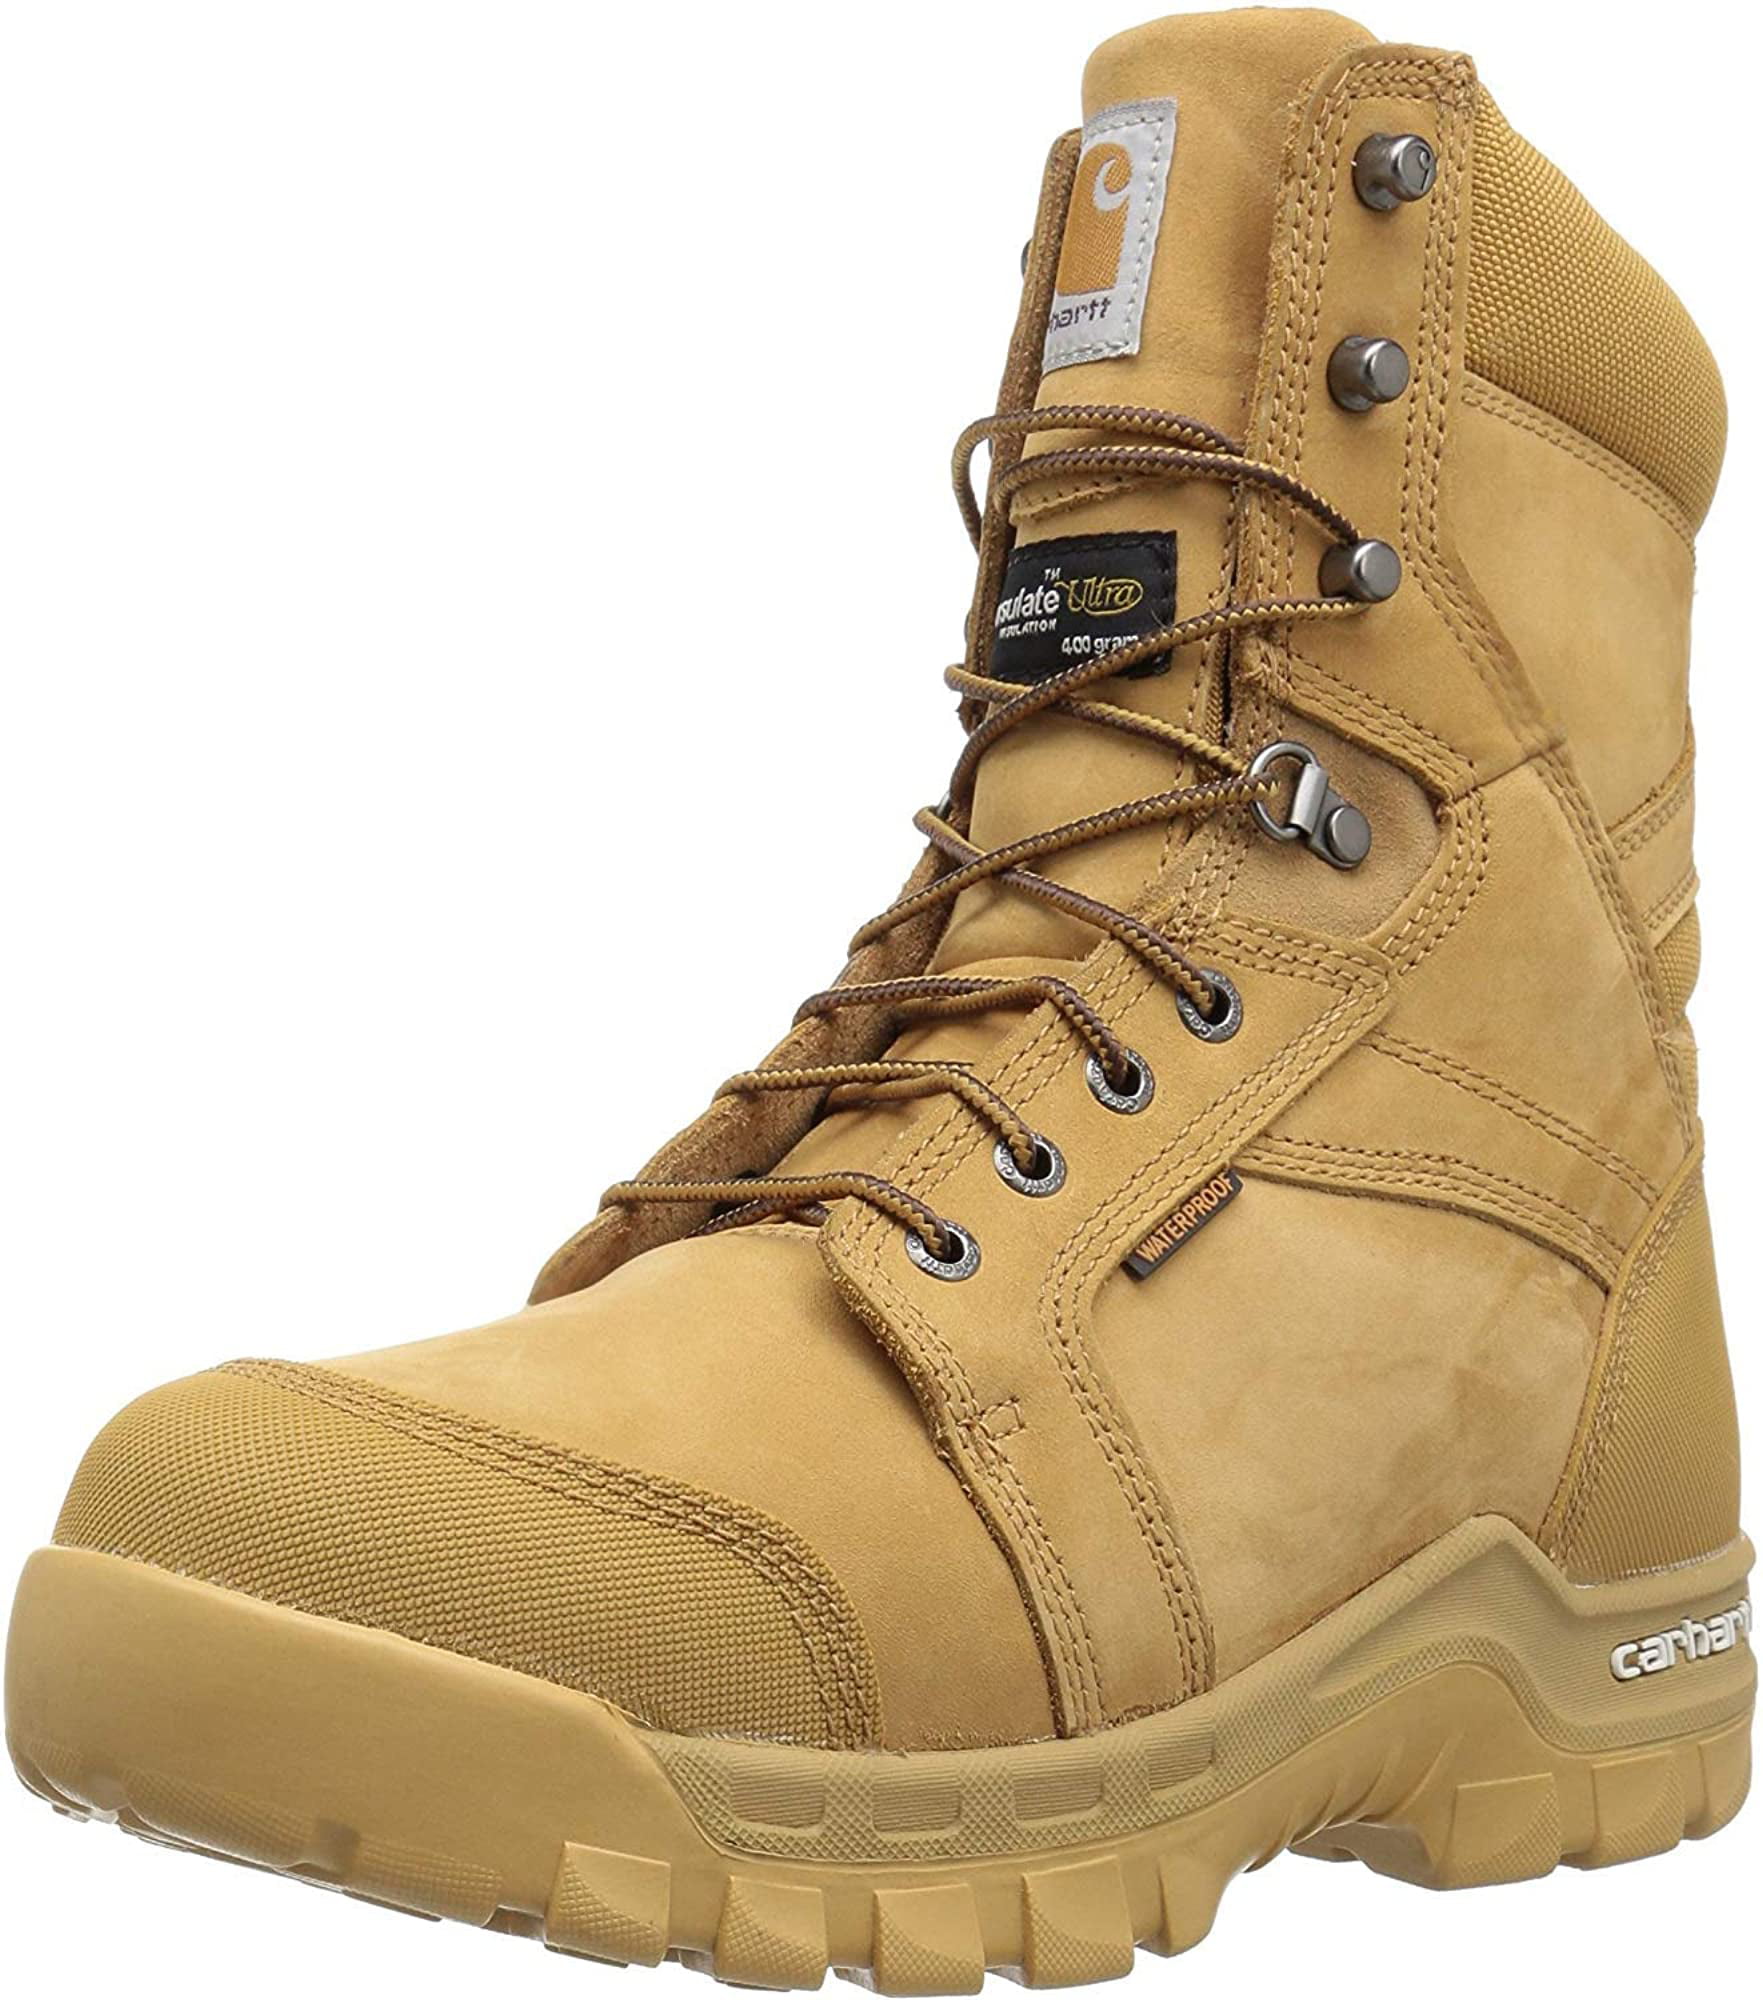 Carhartt Mens 8 Rugged Flex Insulated Waterproof Breathable Safety Toe Leather Work Boot Cmf8389 Delete 